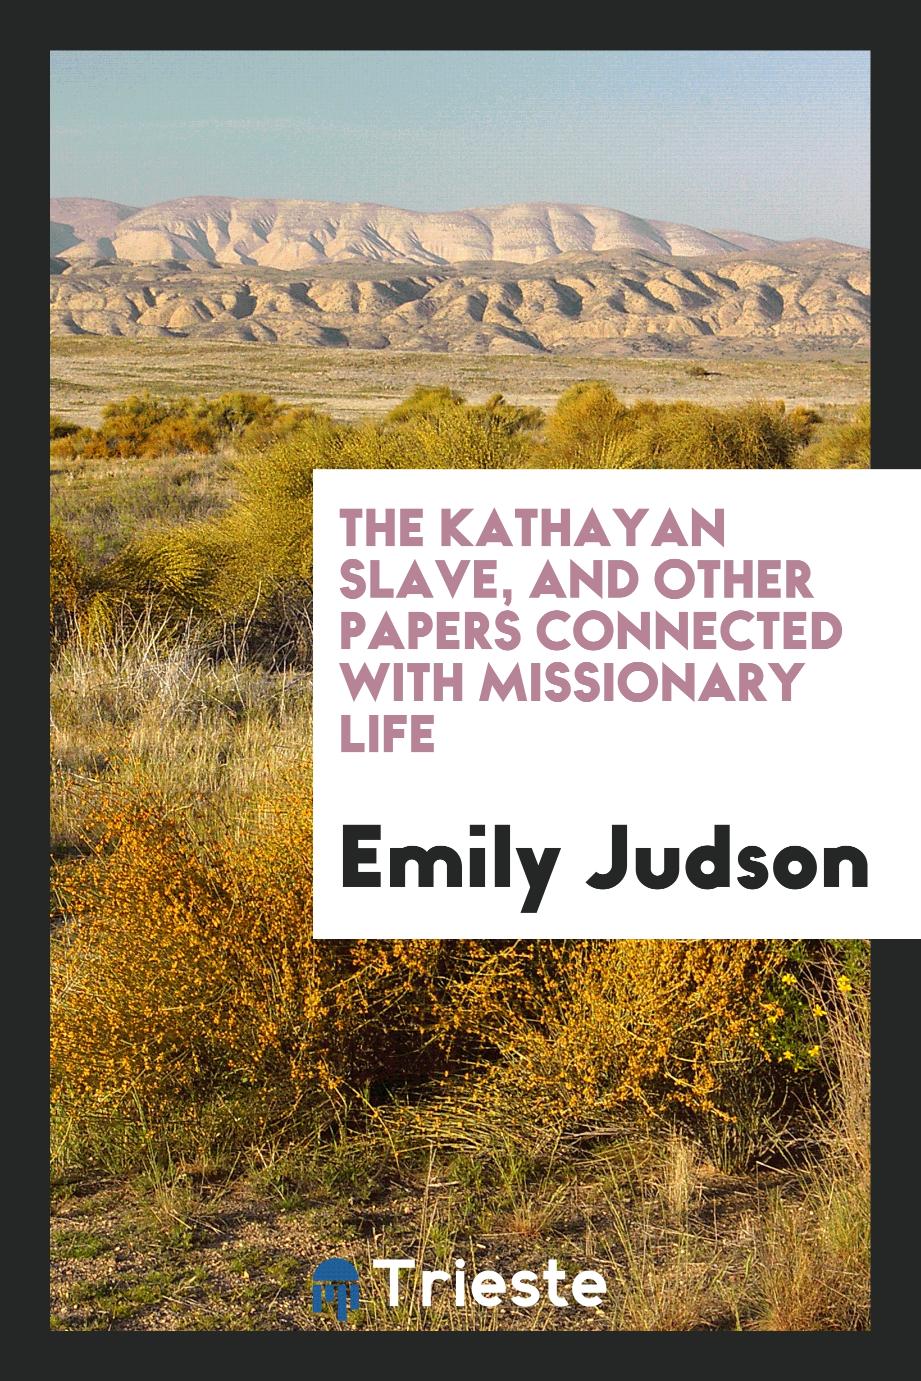 The Kathayan slave, and other papers connected with missionary life